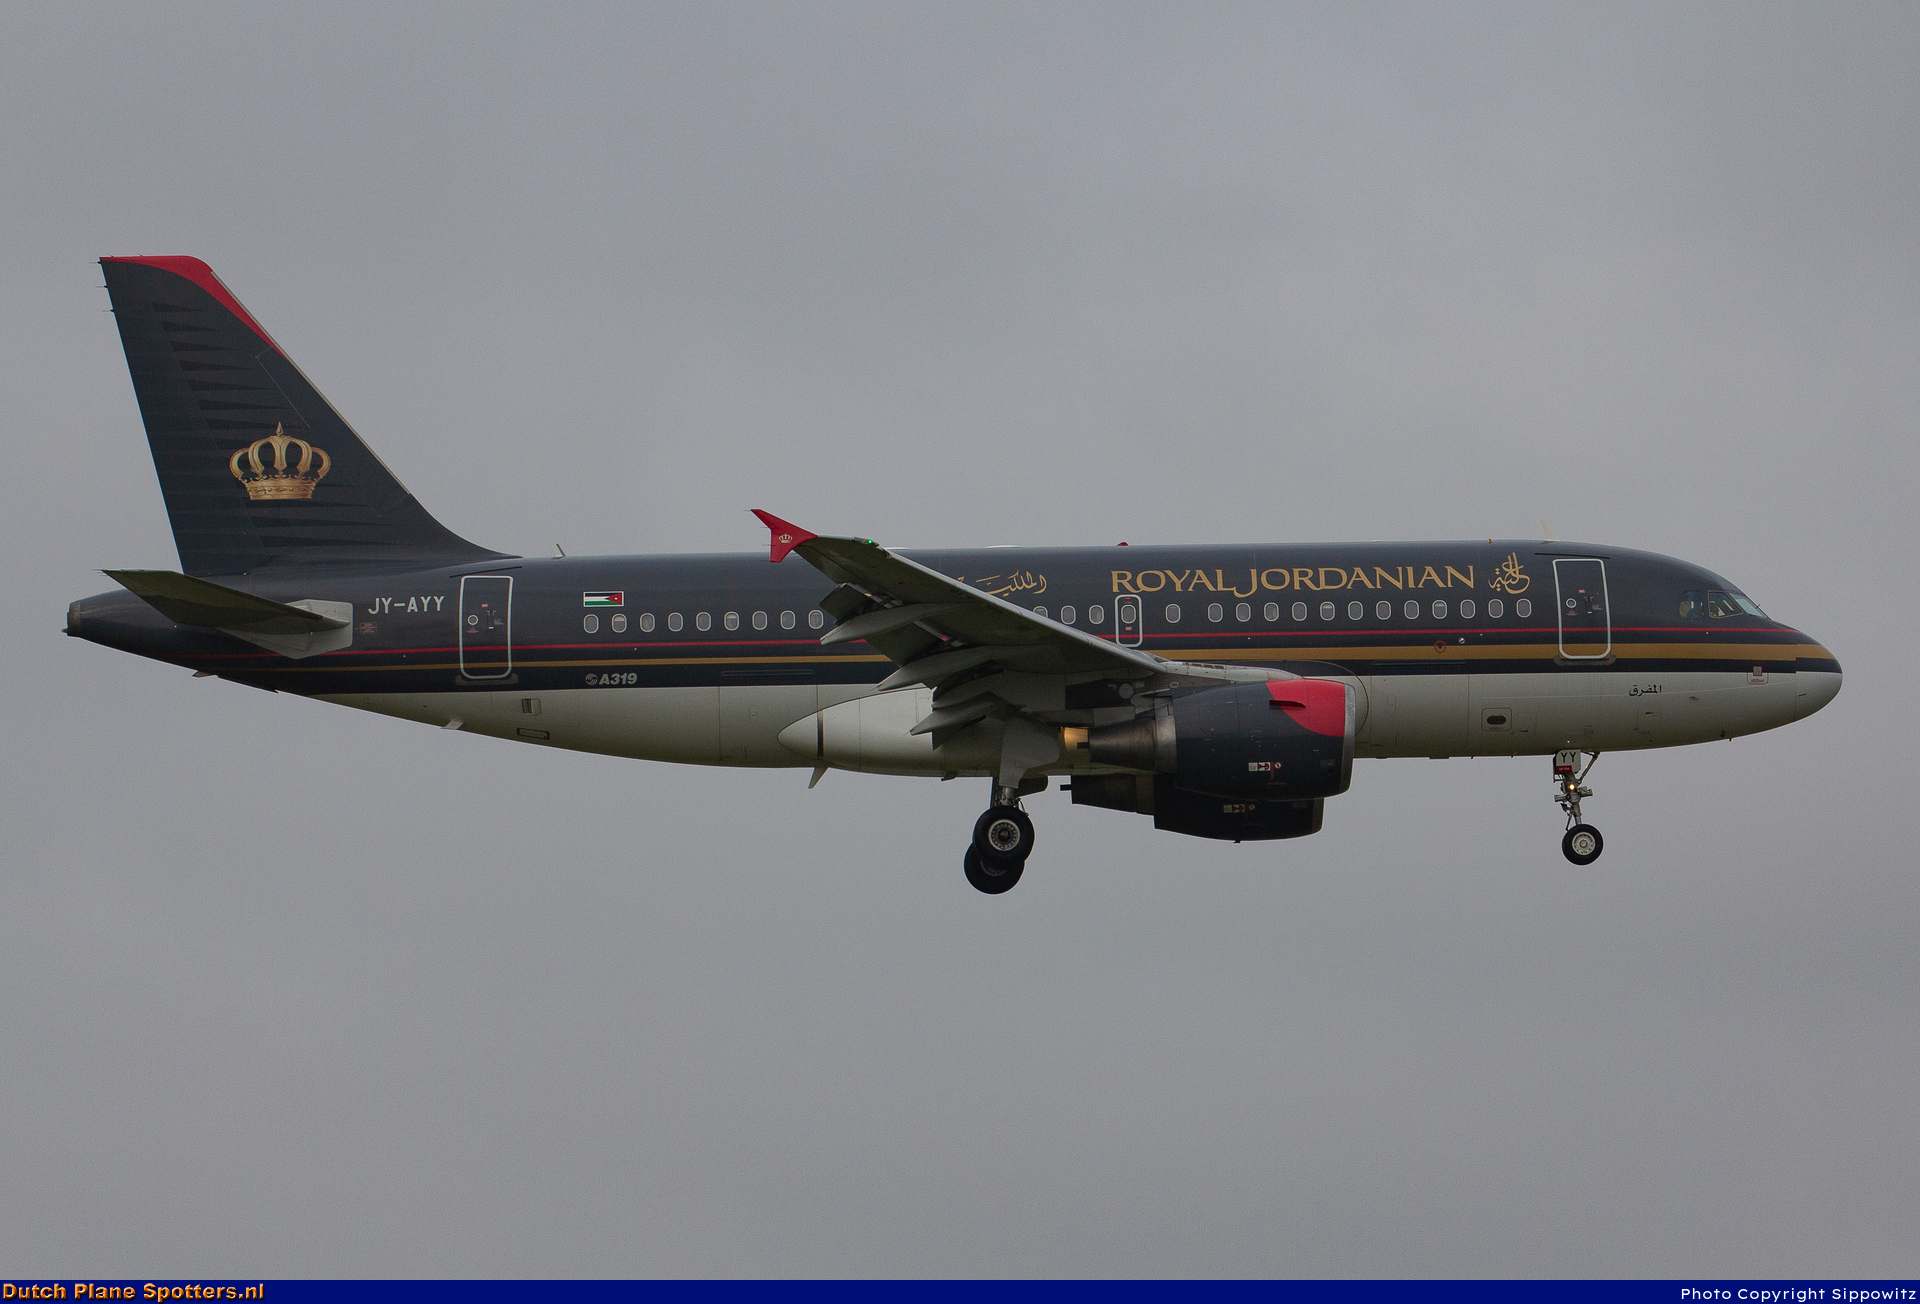 JY-AYY Airbus A319 Royal Jordanian Airlines by Sippowitz